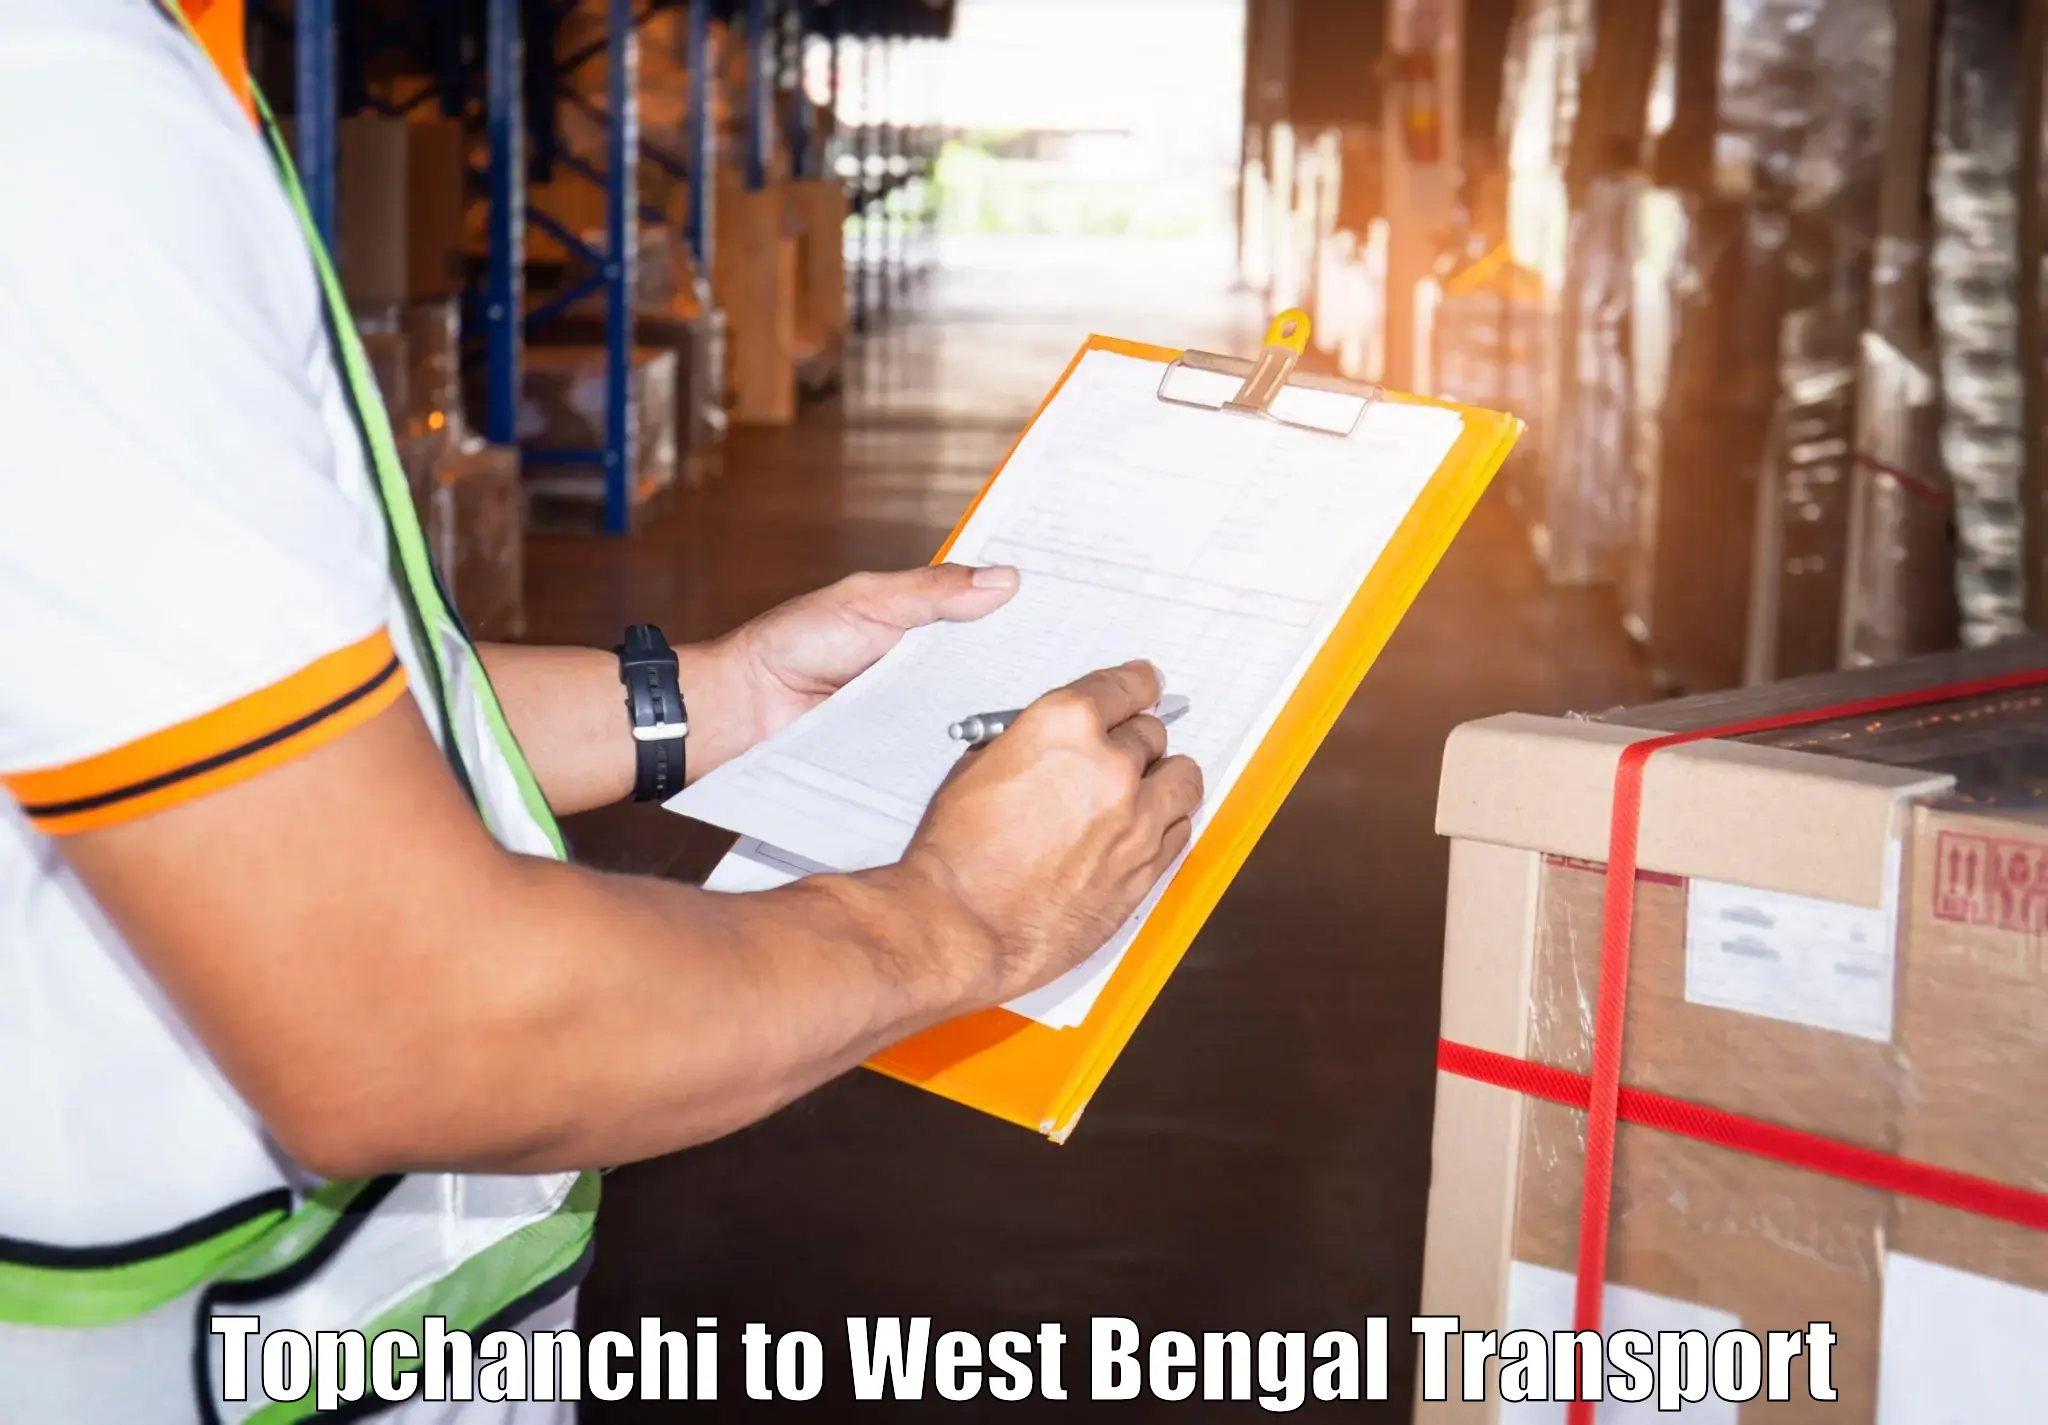 Truck transport companies in India Topchanchi to West Bengal